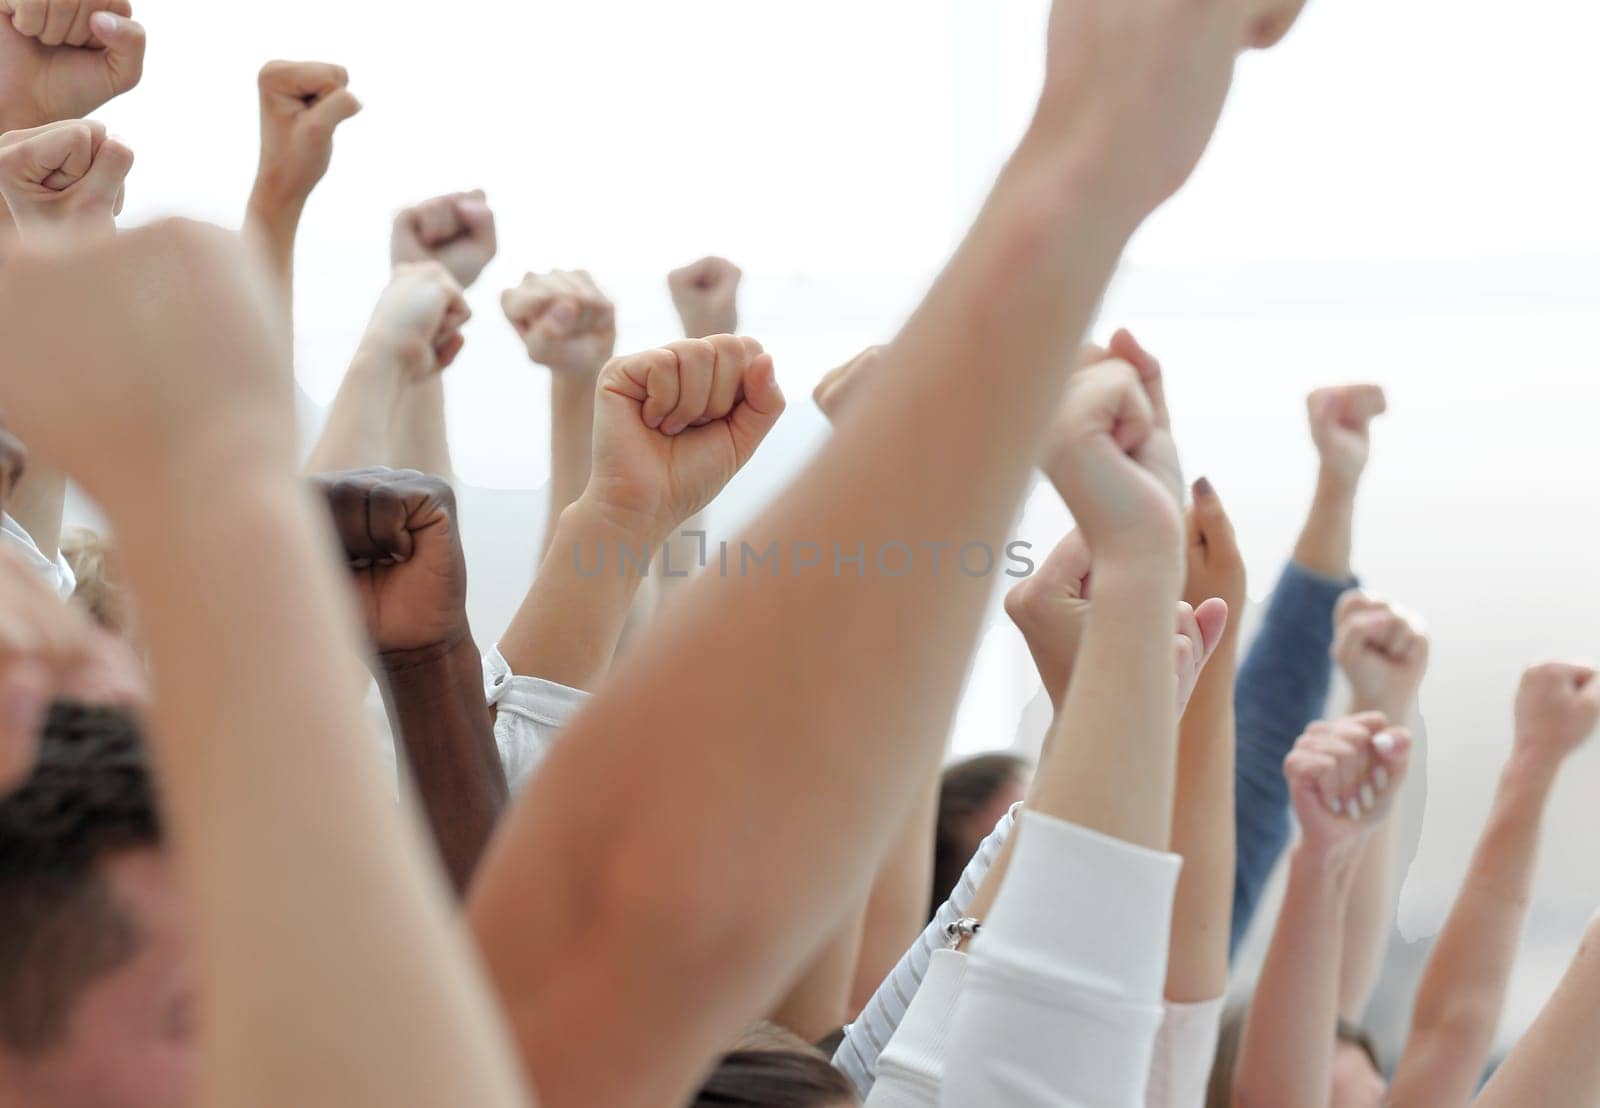 close up.cropped image of a group of young people holding their hands up